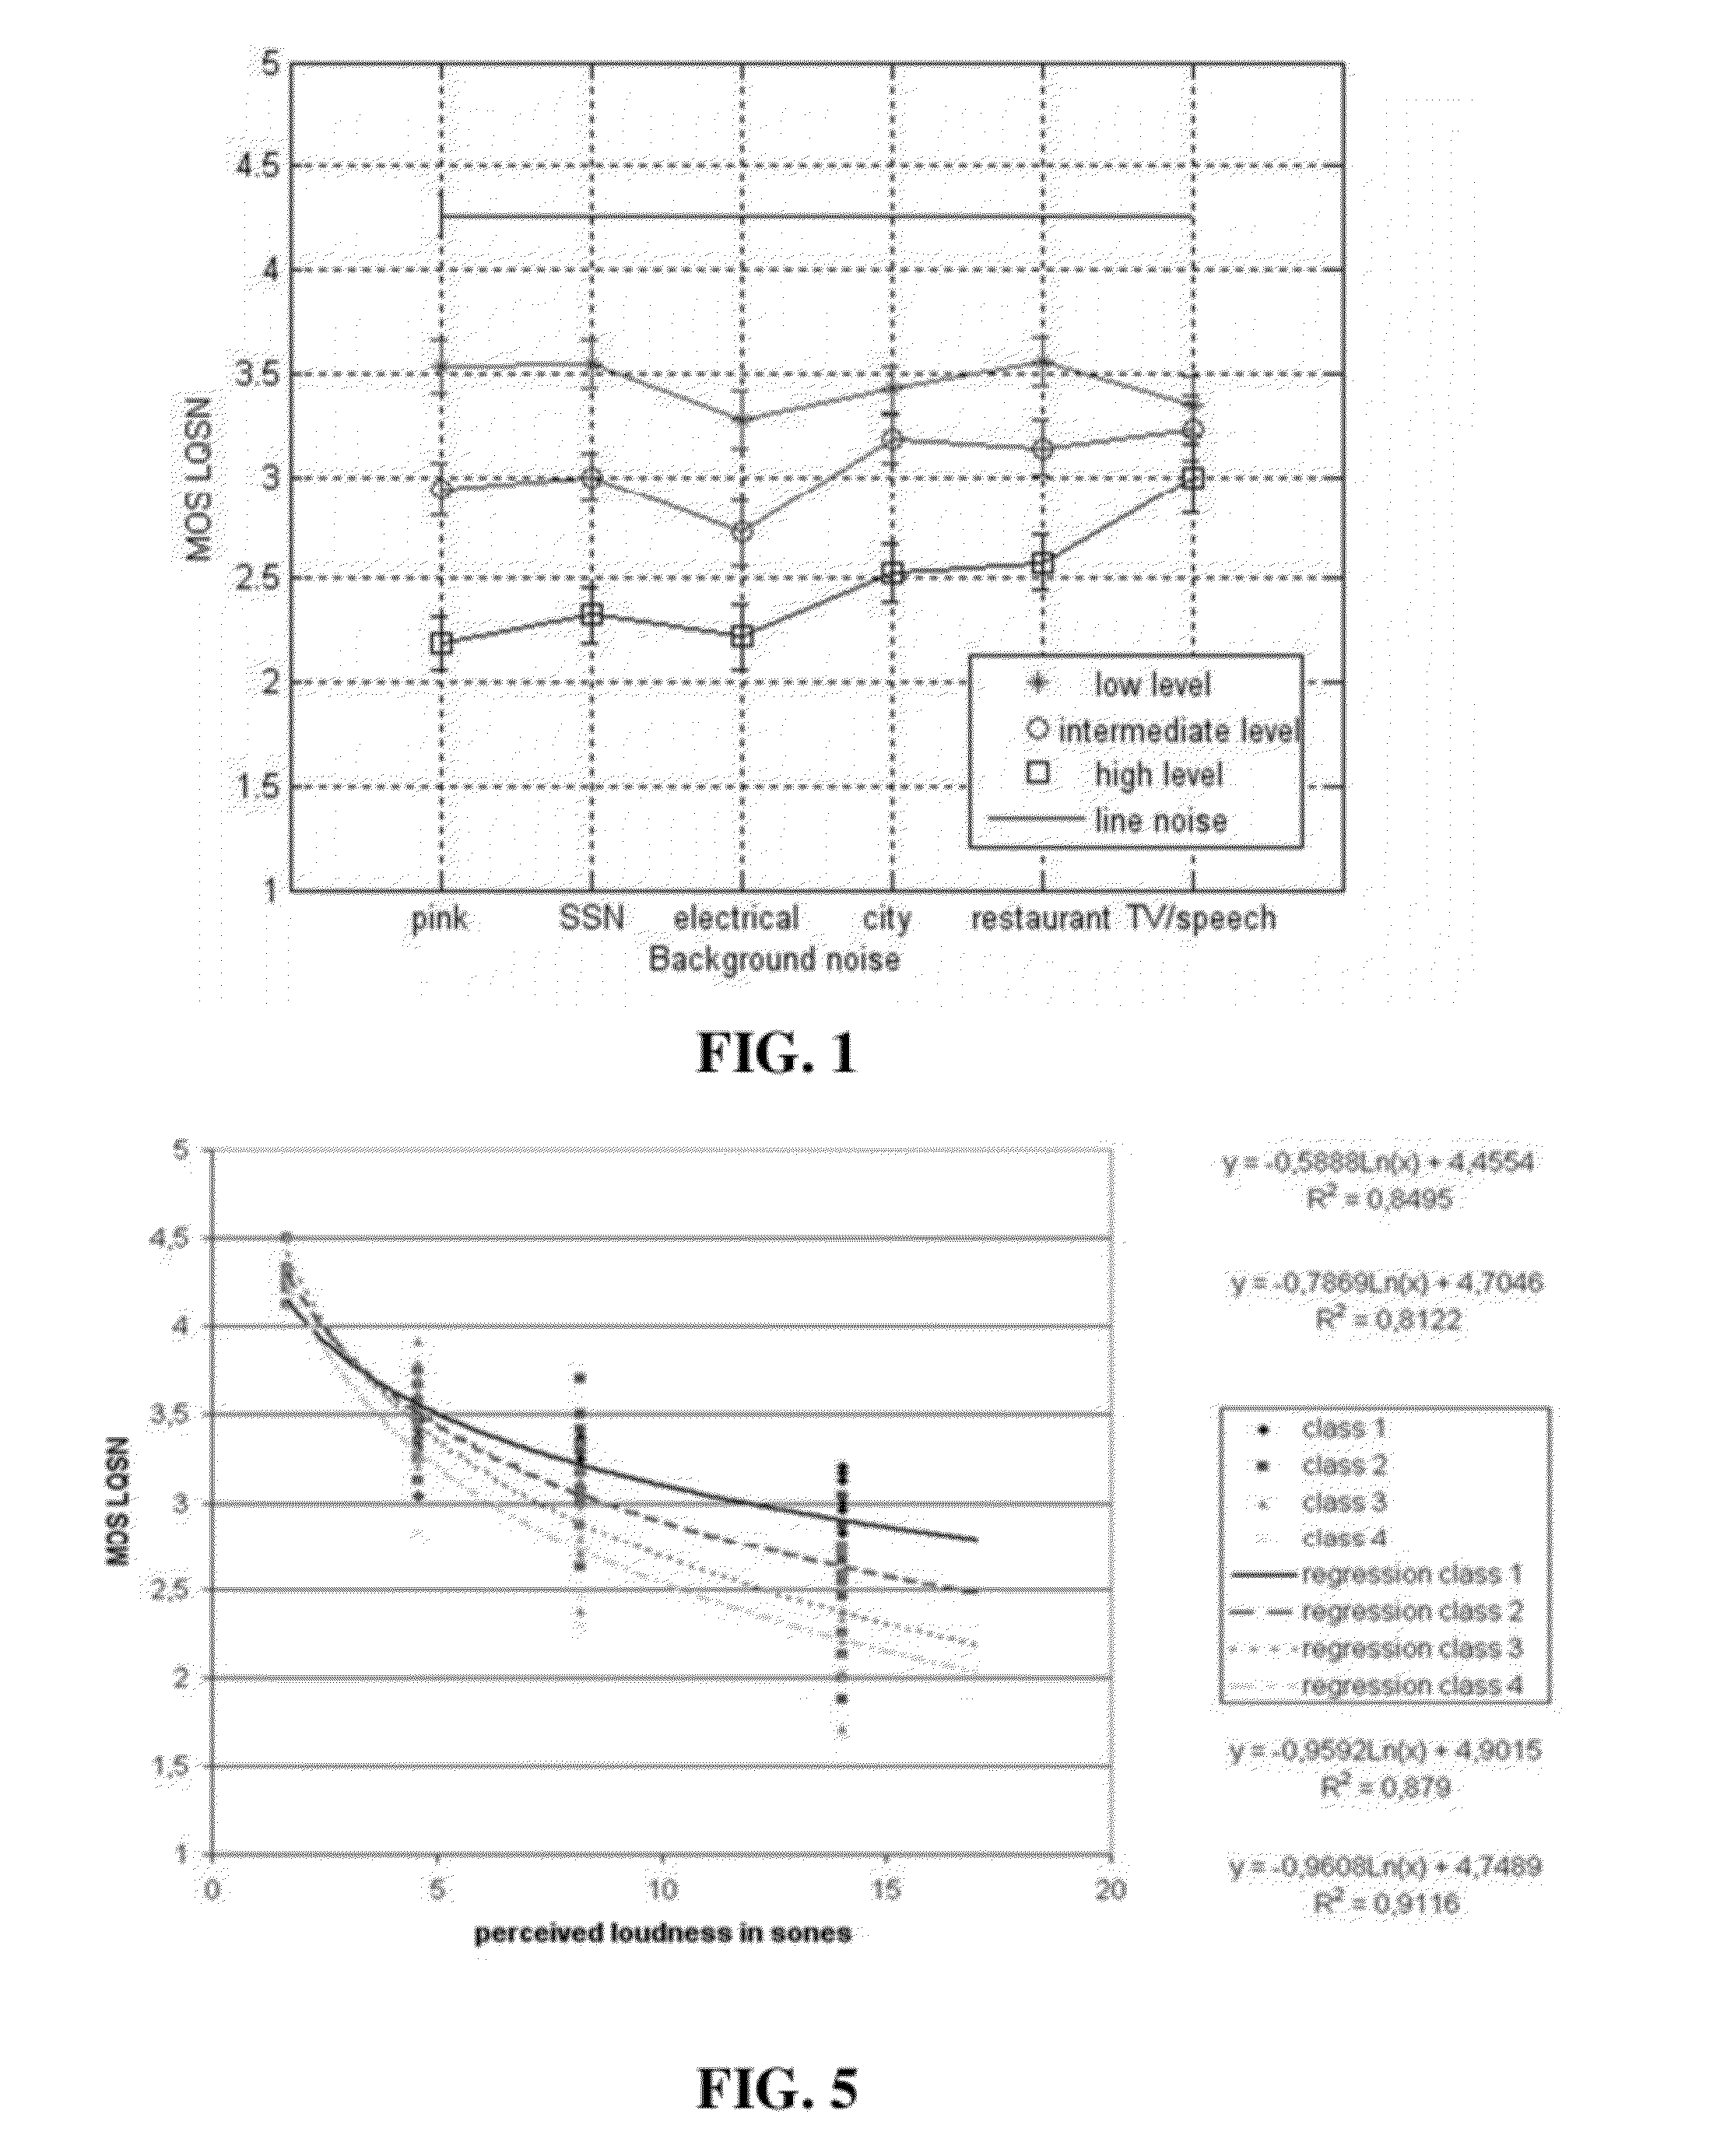 Method and device for the objective evaluation of the voice quality of a speech signal taking into account the classification of the background noise contained in the signal